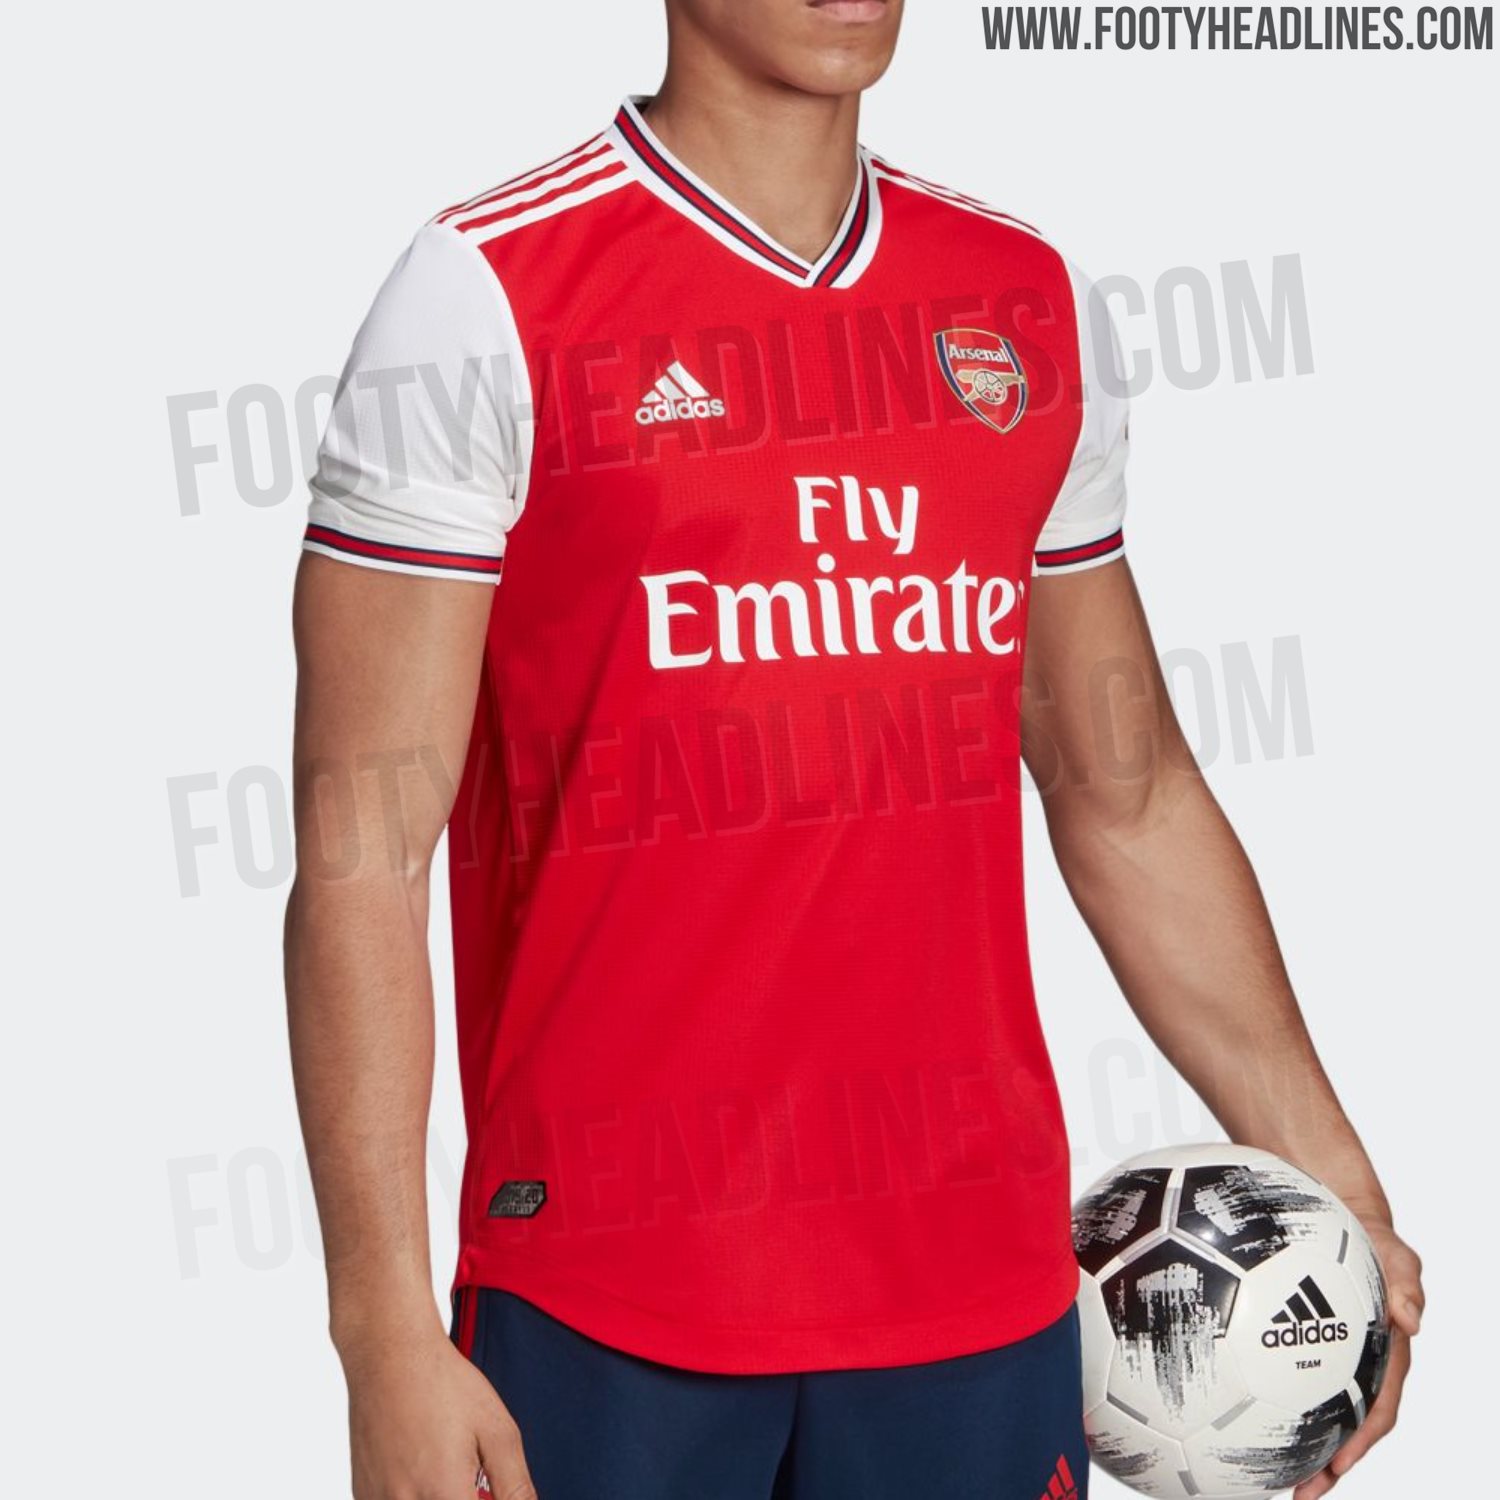 arsenal new kit 2019 release date